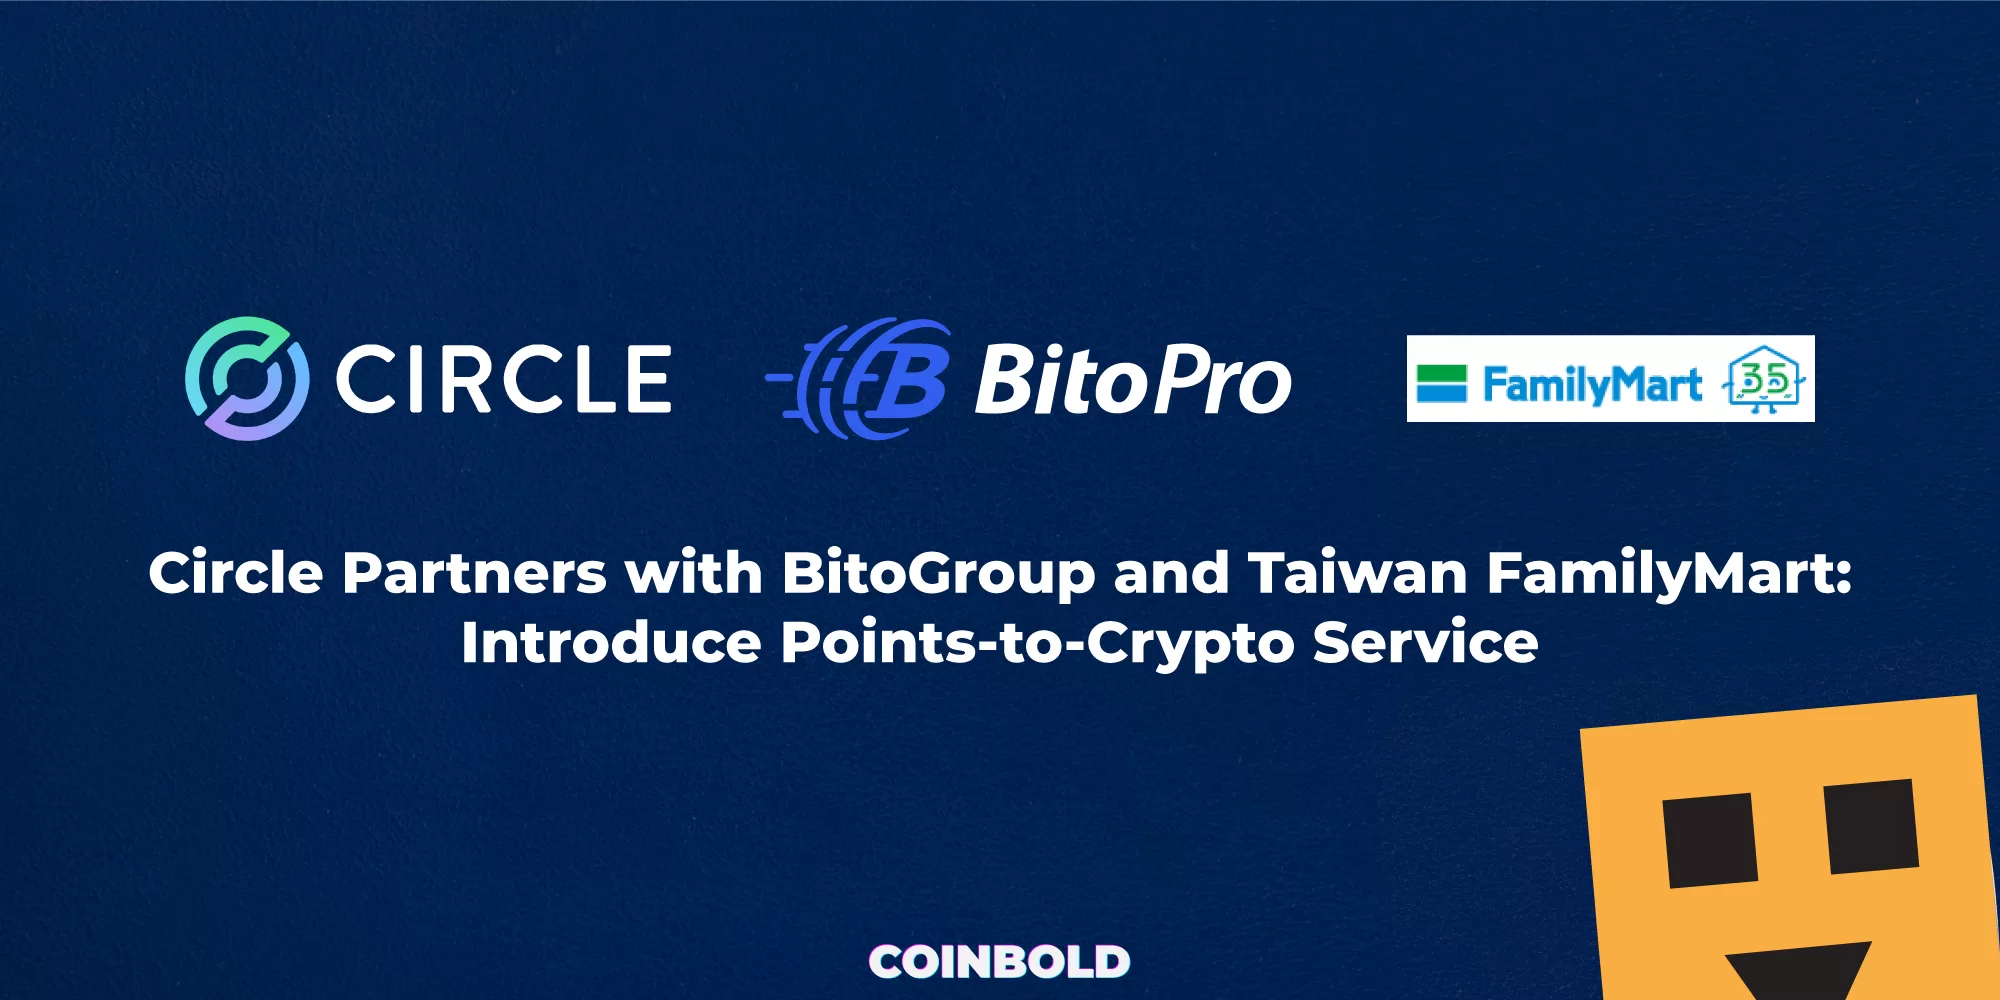 Circle Partners with BitoGroup and Taiwan FamilyMart Introduce Points to Crypto Service